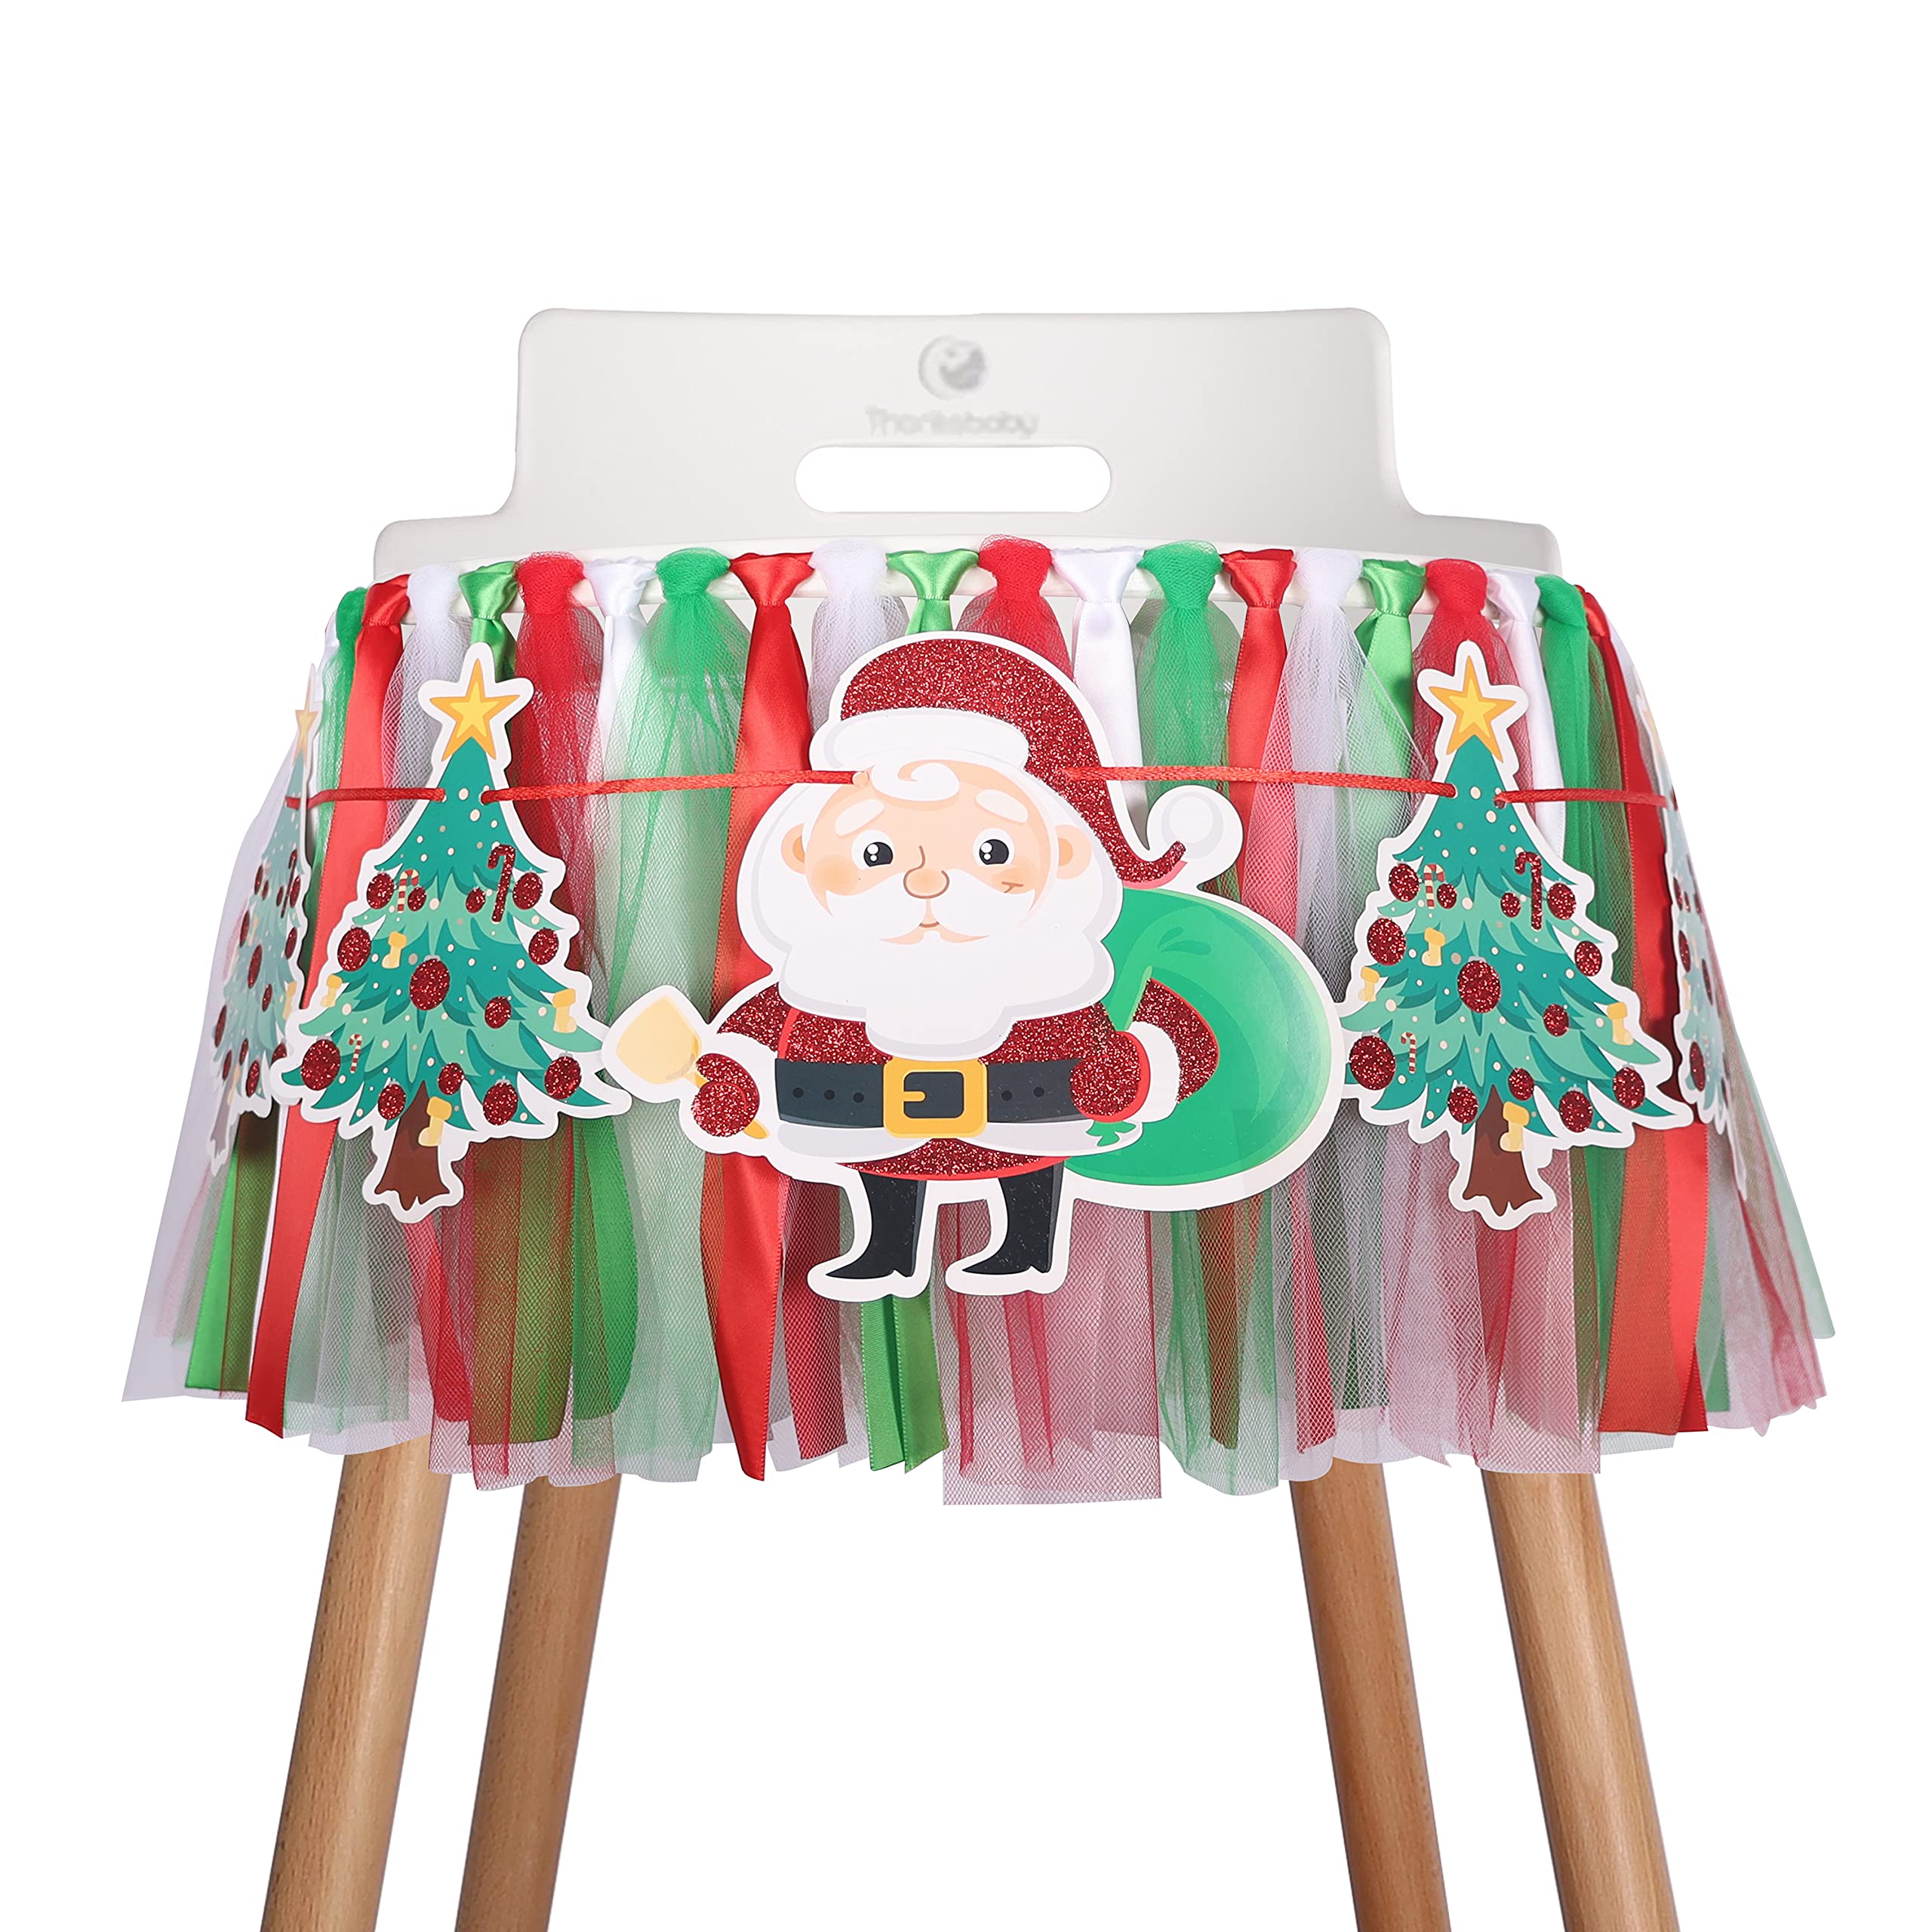 MIAUL christmas Highchair Banner Decoration for Baby - High chair Fabric garland, Merry christmas Banner Photo Props, Handmade Party T